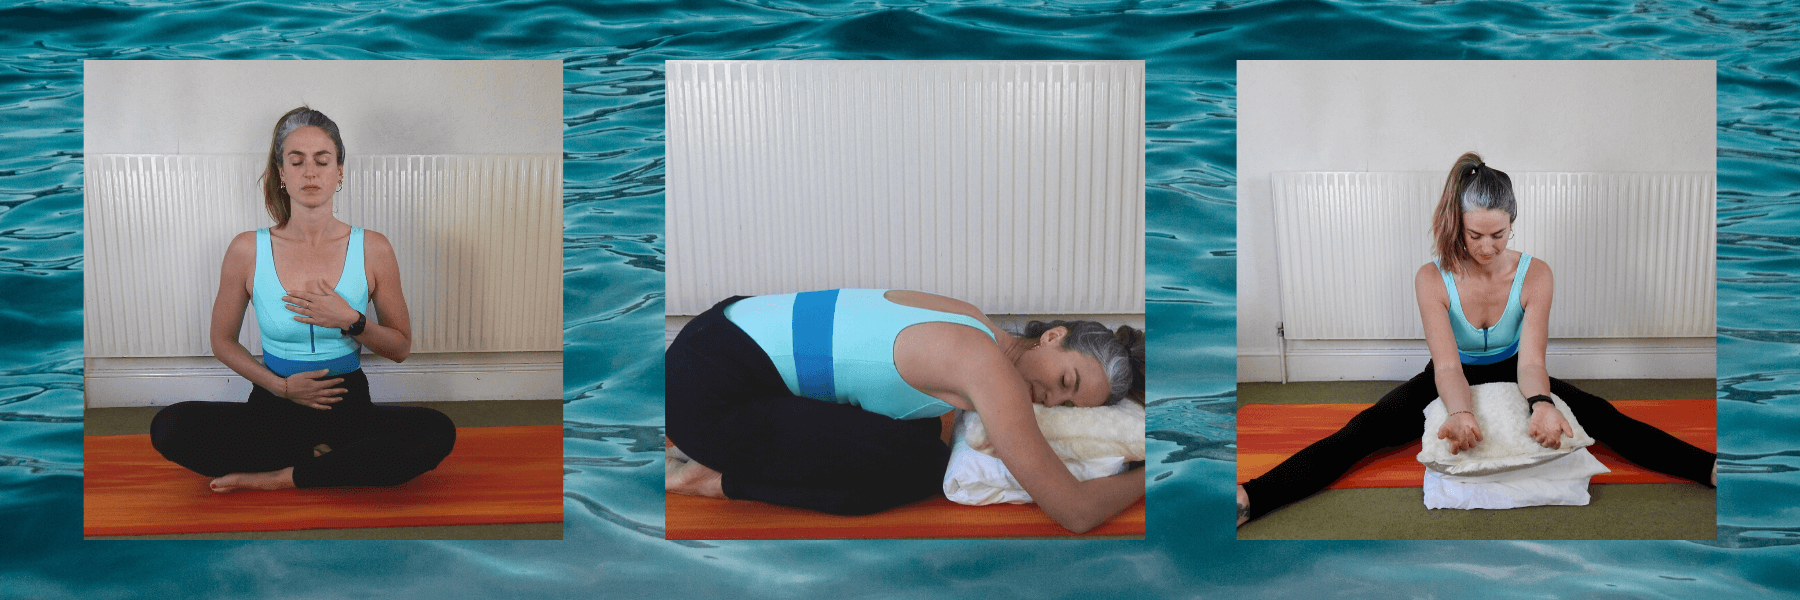 Yoga & Breathing For Anxiety